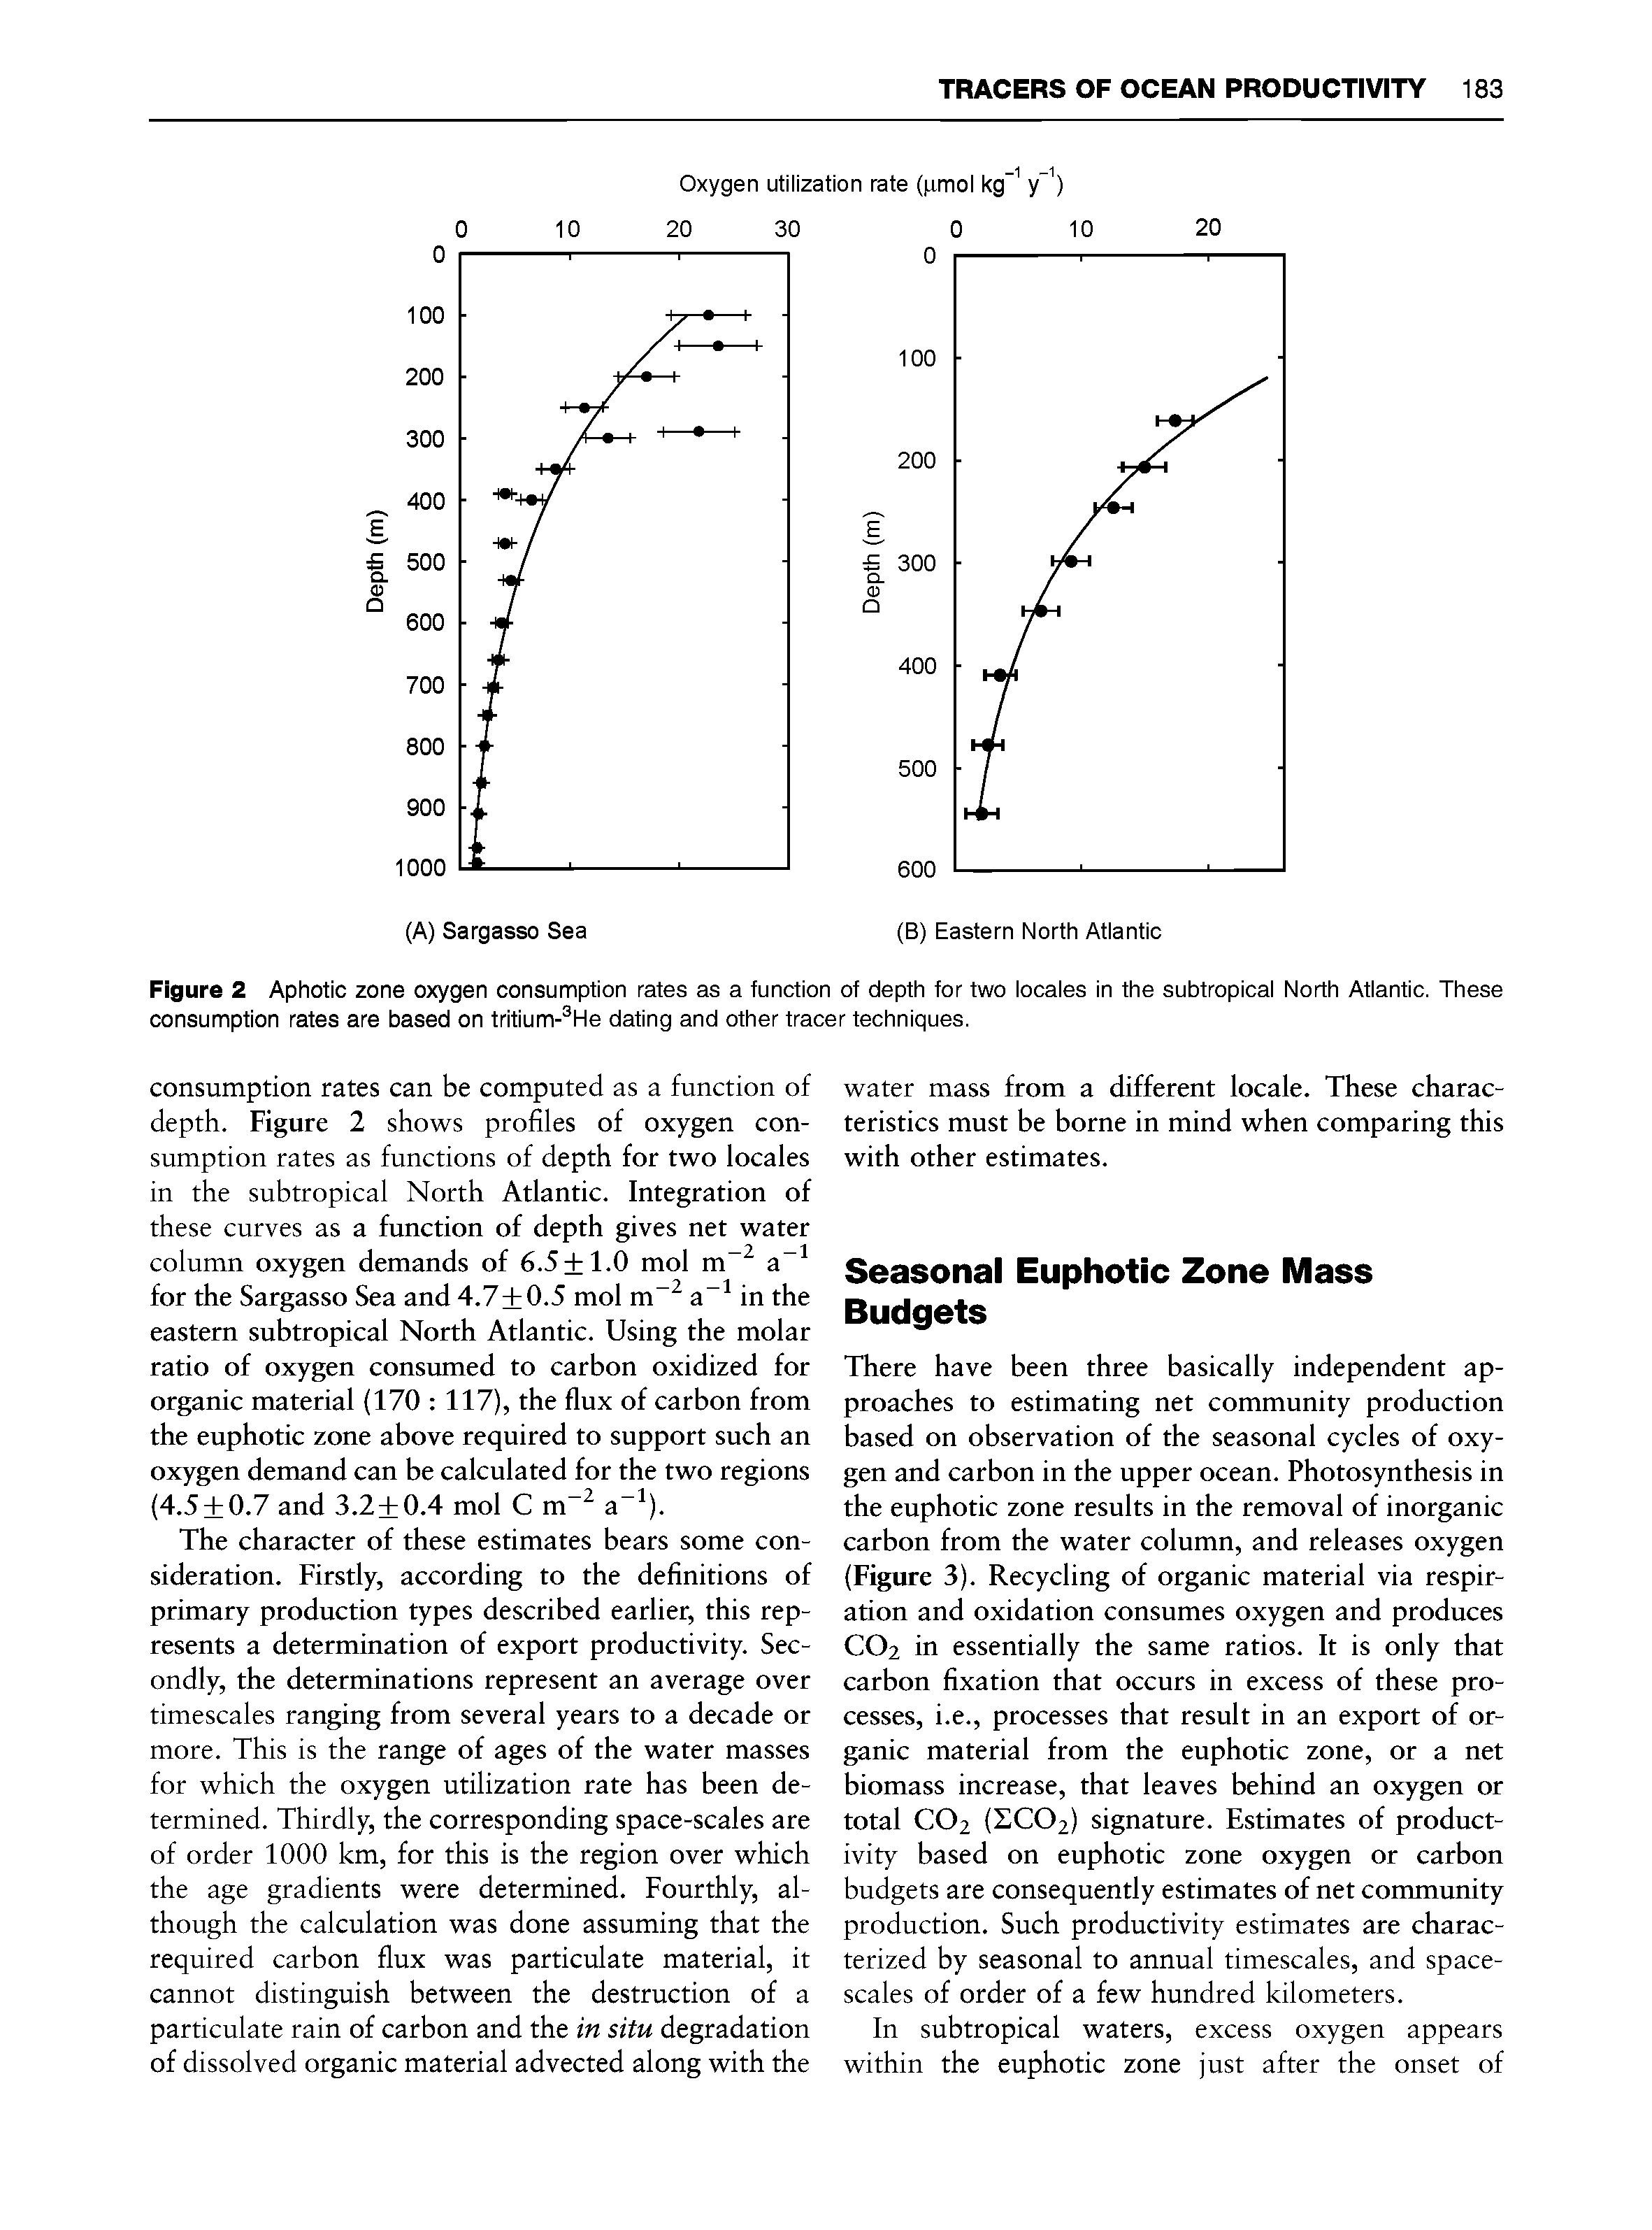 Figure 2 Aphotic zone oxygen consumption rates as a function of depfh for fwo locales in fhe subfropical North Atlantic. These consumption rates are based on tritium- He dating and other tracer techniques.